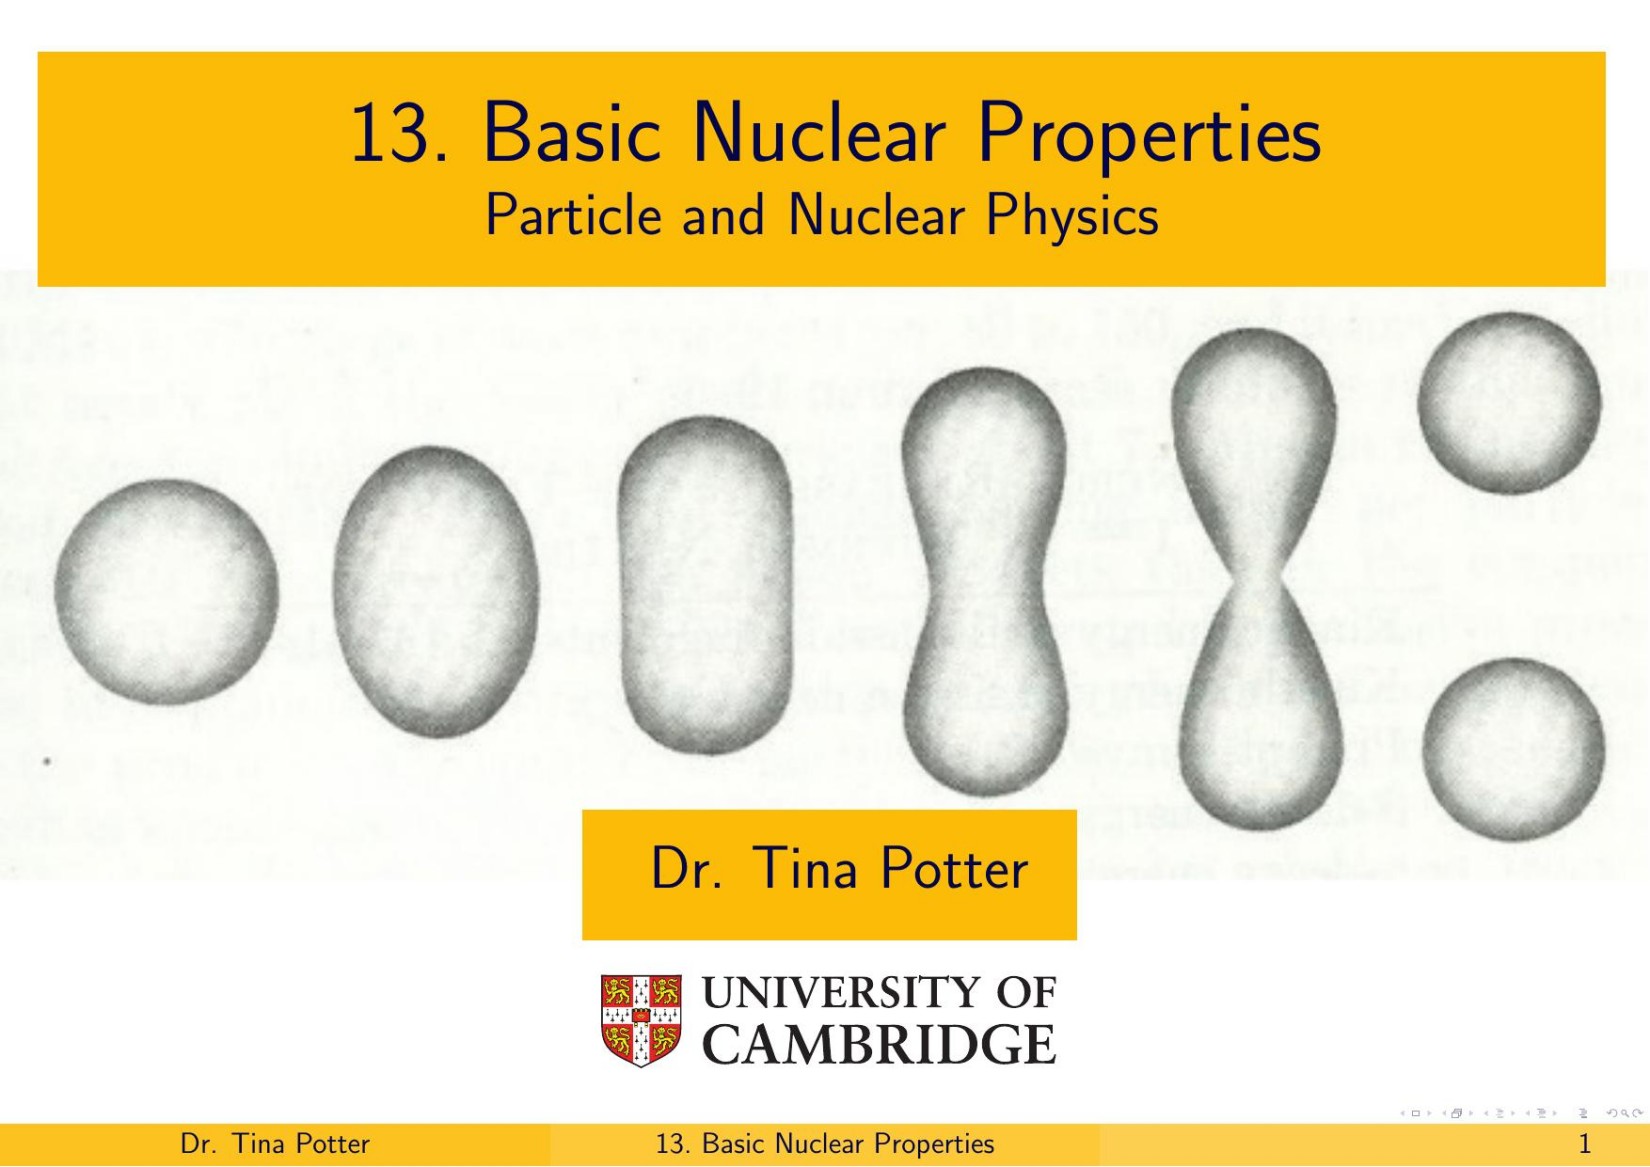 13. Basic Nuclear Properties - Particle and Nuclear Physics